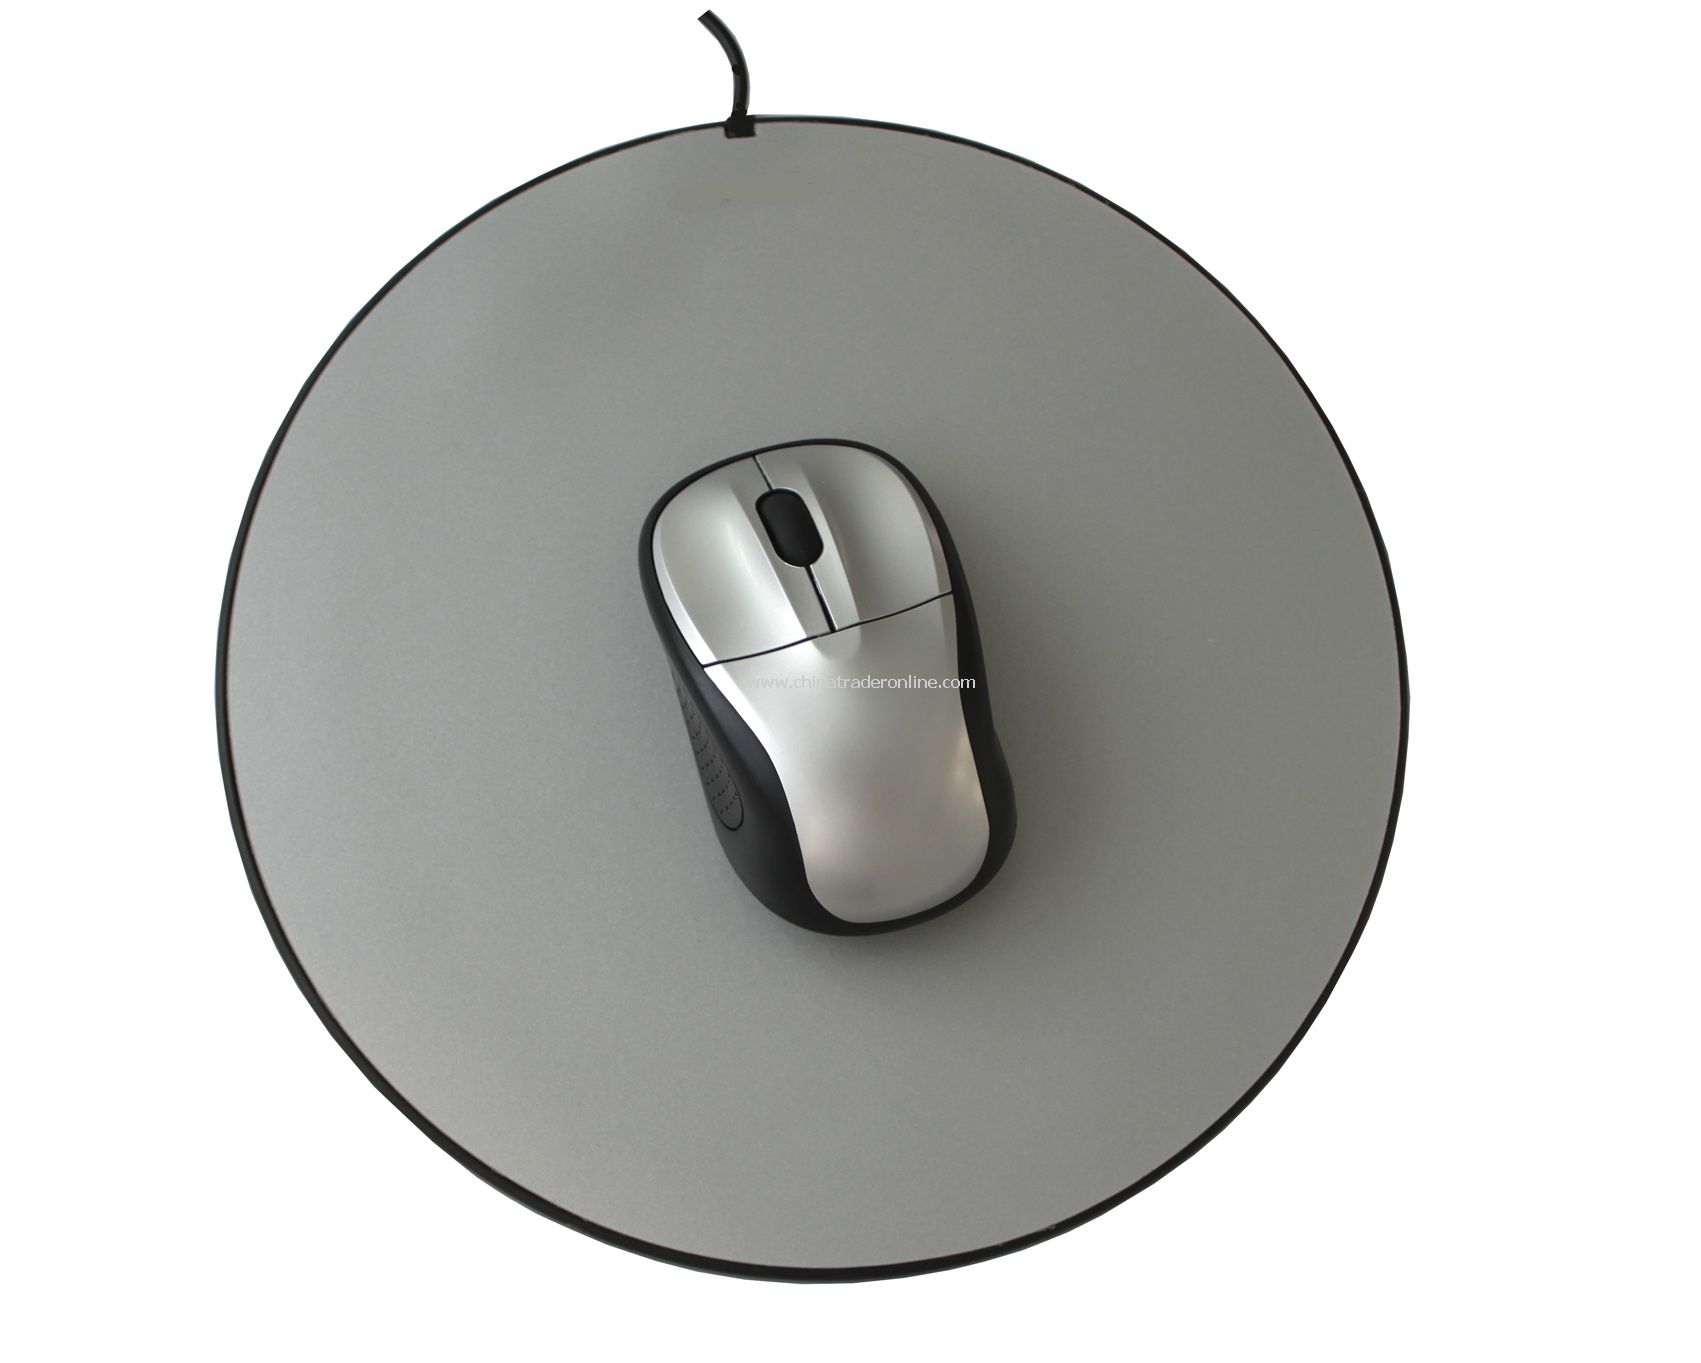 Battery Free Wireless Mouse from China